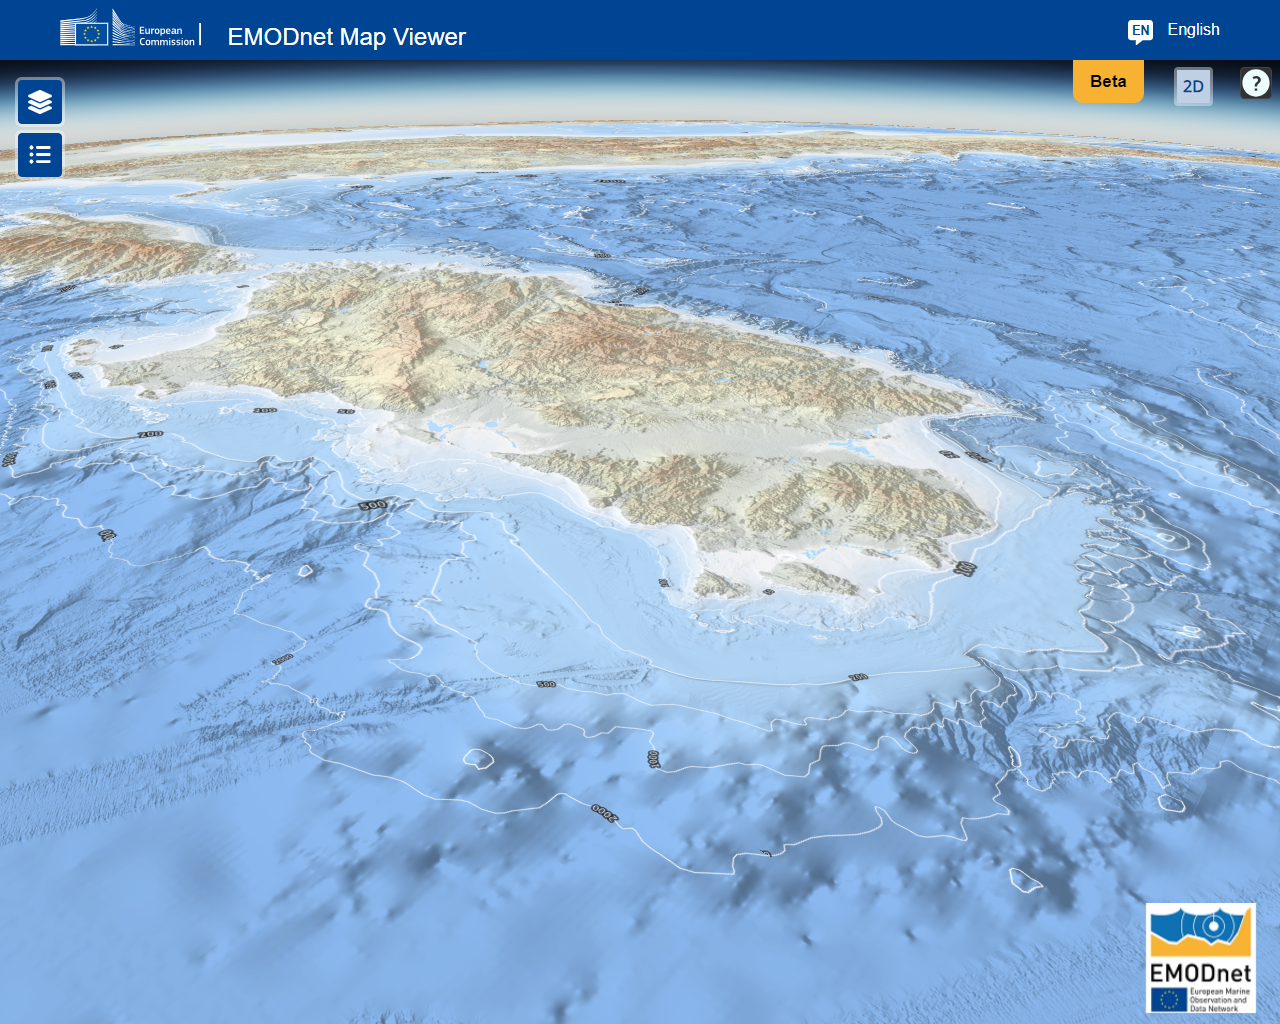 3D bathymetry of the Mesolithic Atlantic Ocean now known as the Mediterranean Sea 5